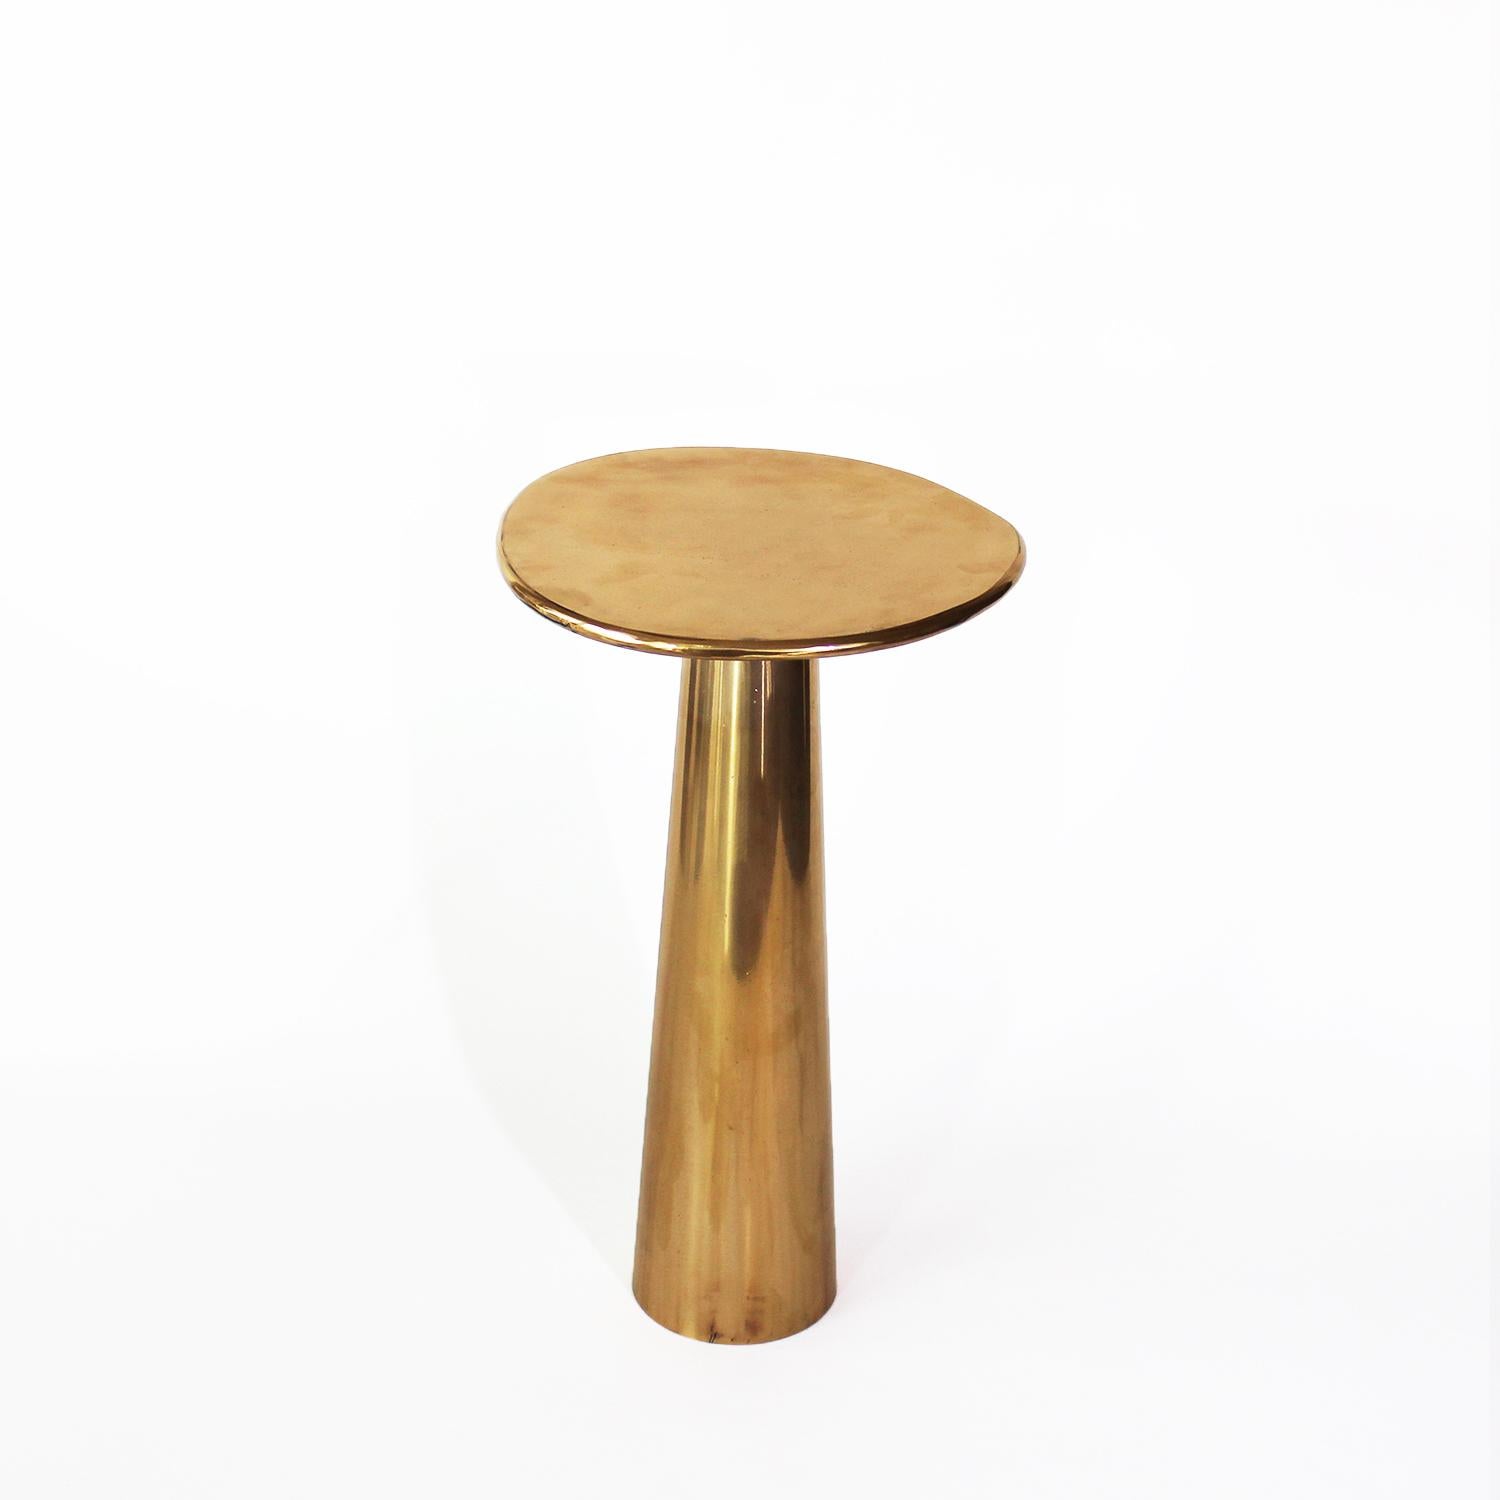 The Cone Table is inspired by the interconnections between the elements and life forms. The conical shape of the base, the asymmetrical form of the top, and the rounded edges provide the table with a silky appearance.

Cone Table, made of bronze